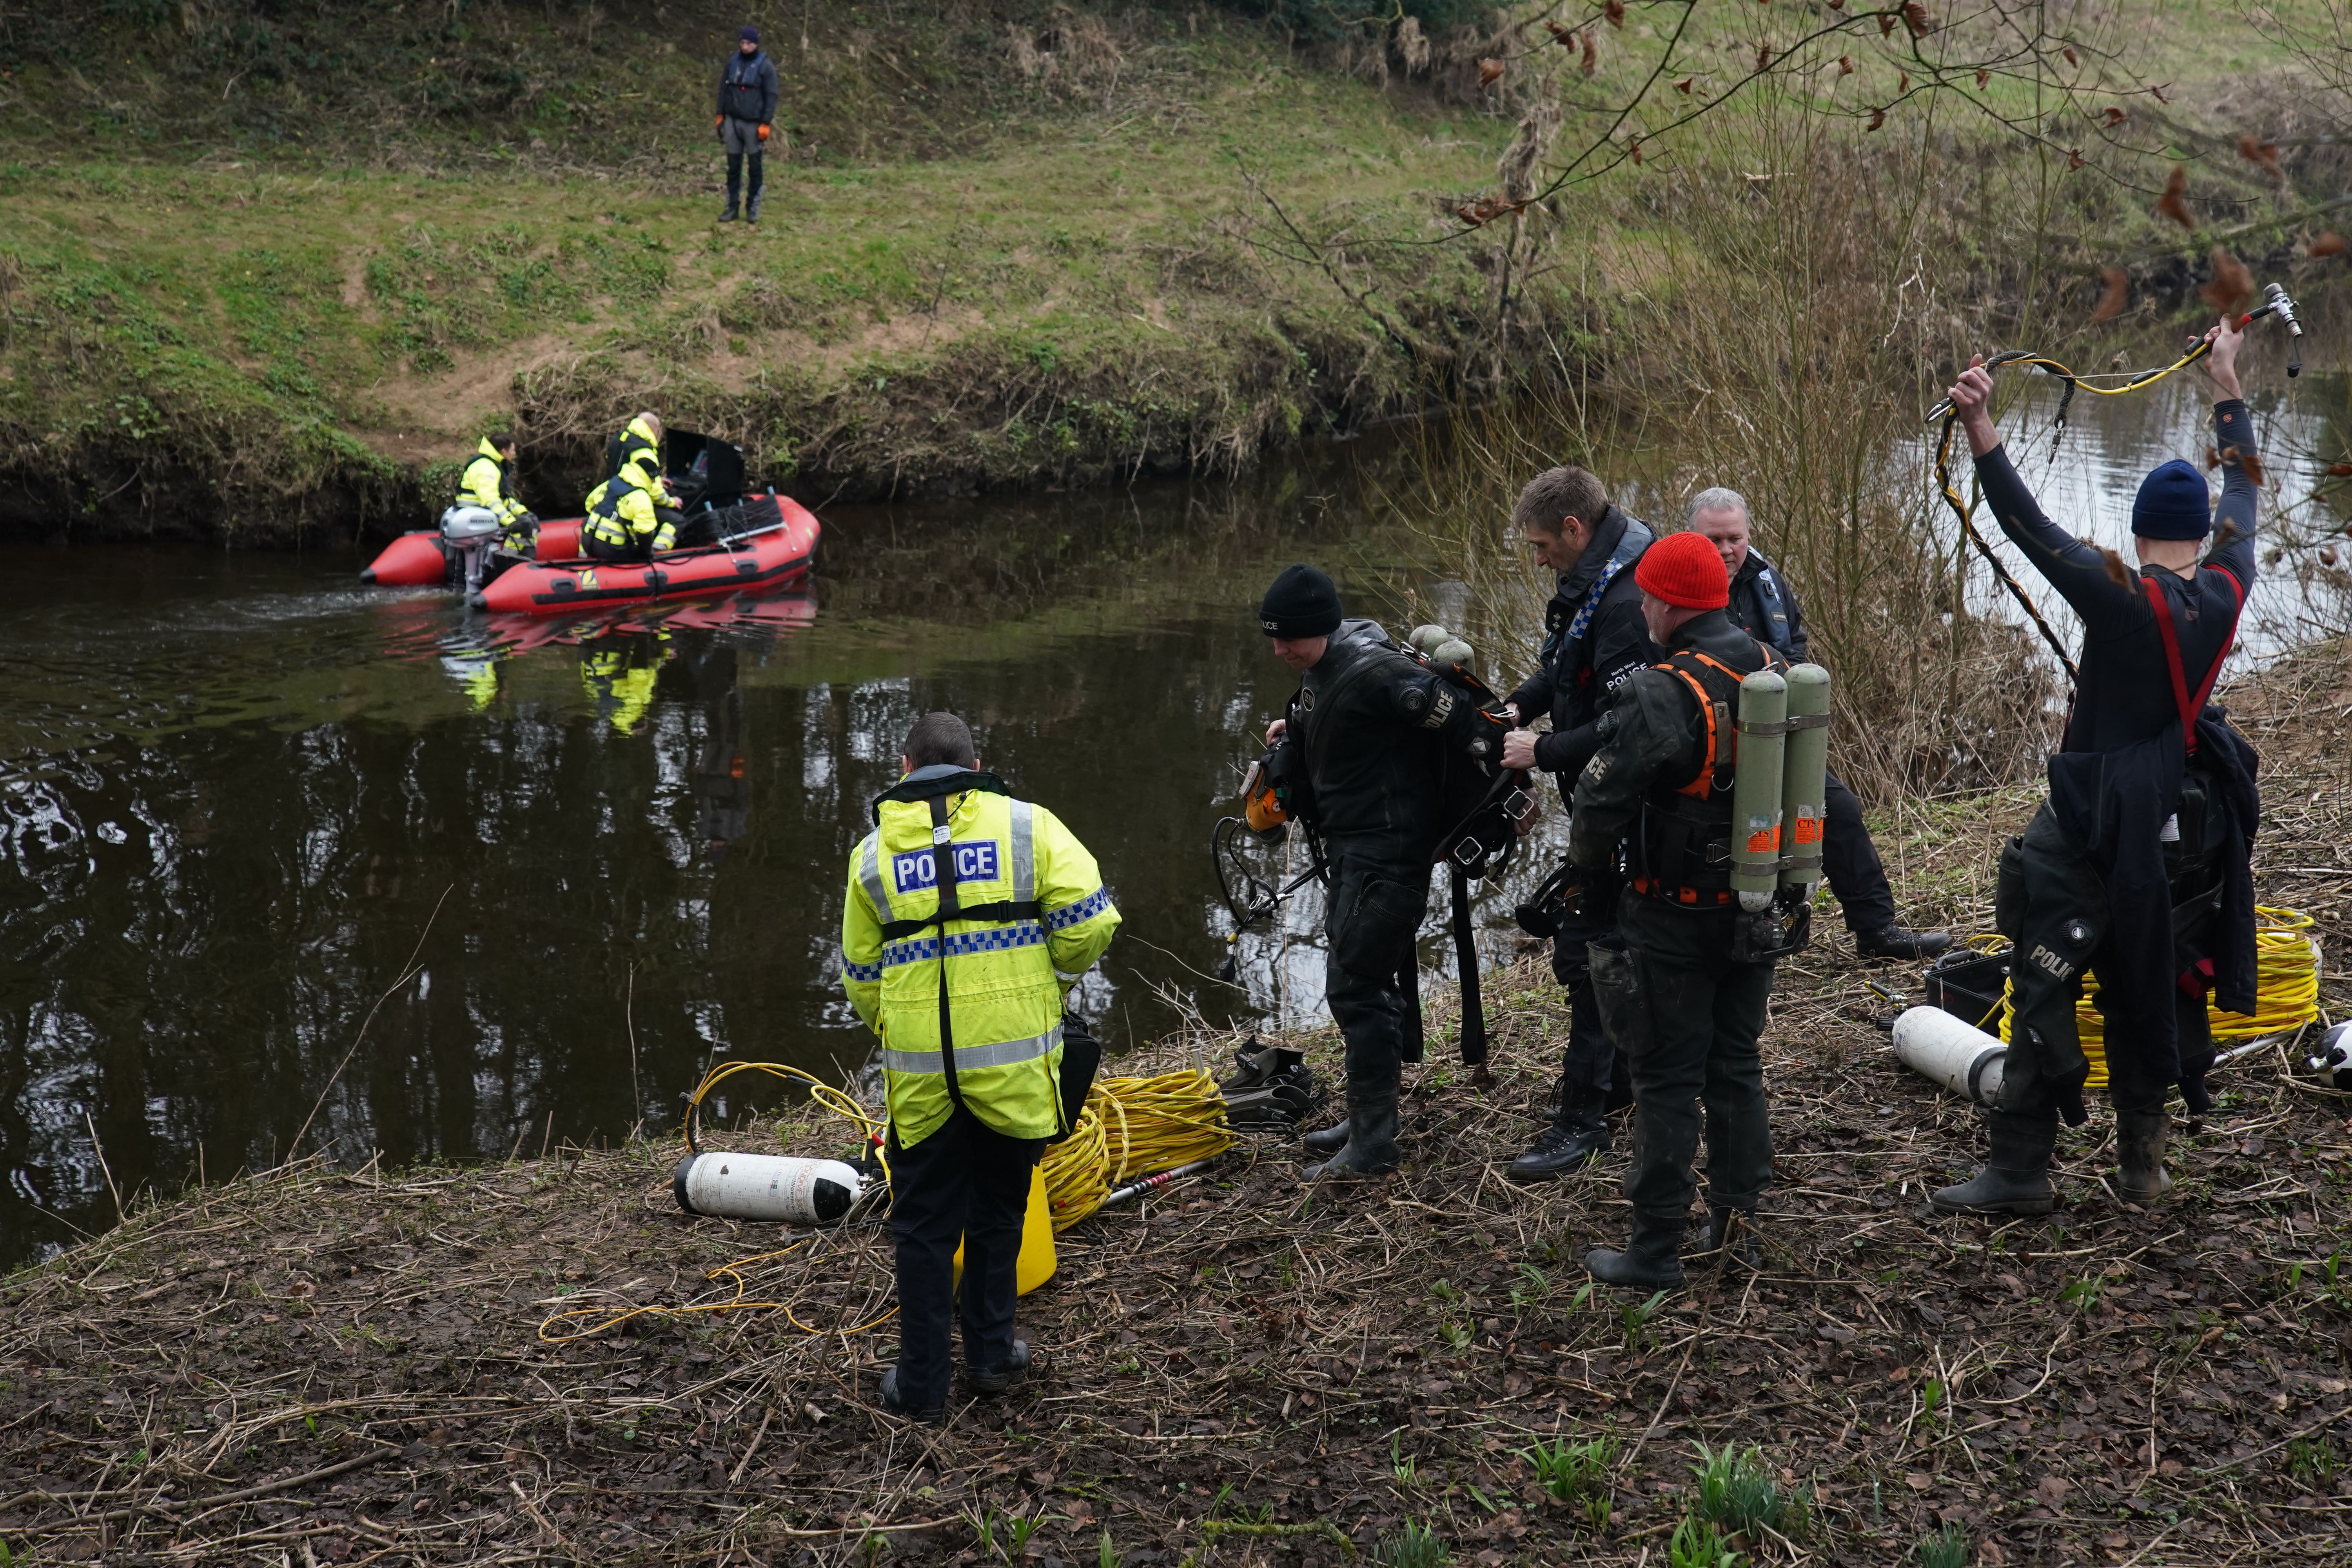 The search team working on the River Wyre to find the mother of two